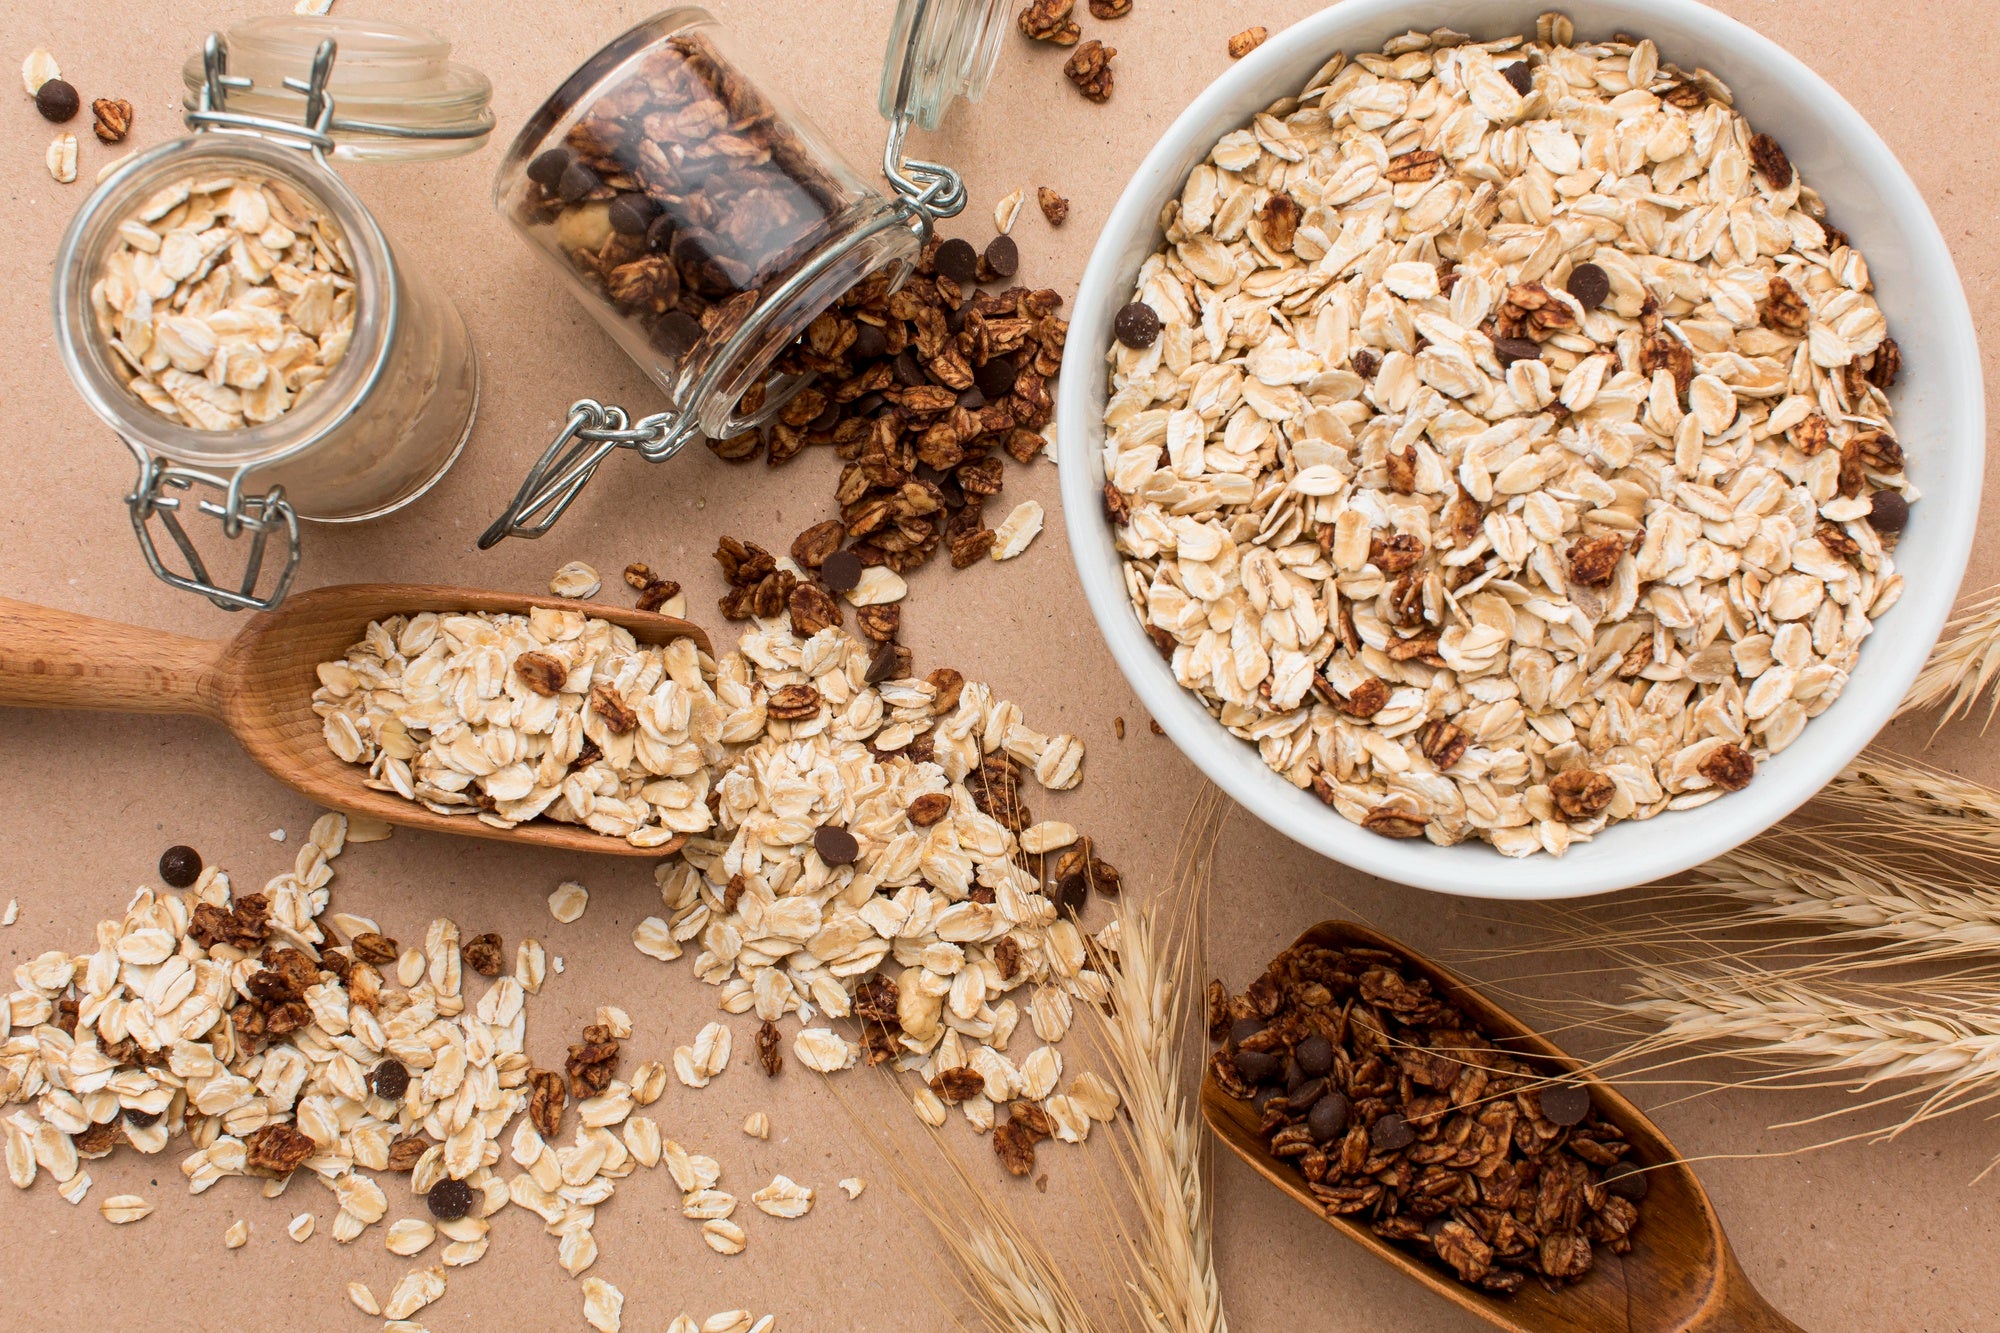 A Crunchy Start: Nourishing Your Day with the Benefits of Oat Bran Cereal